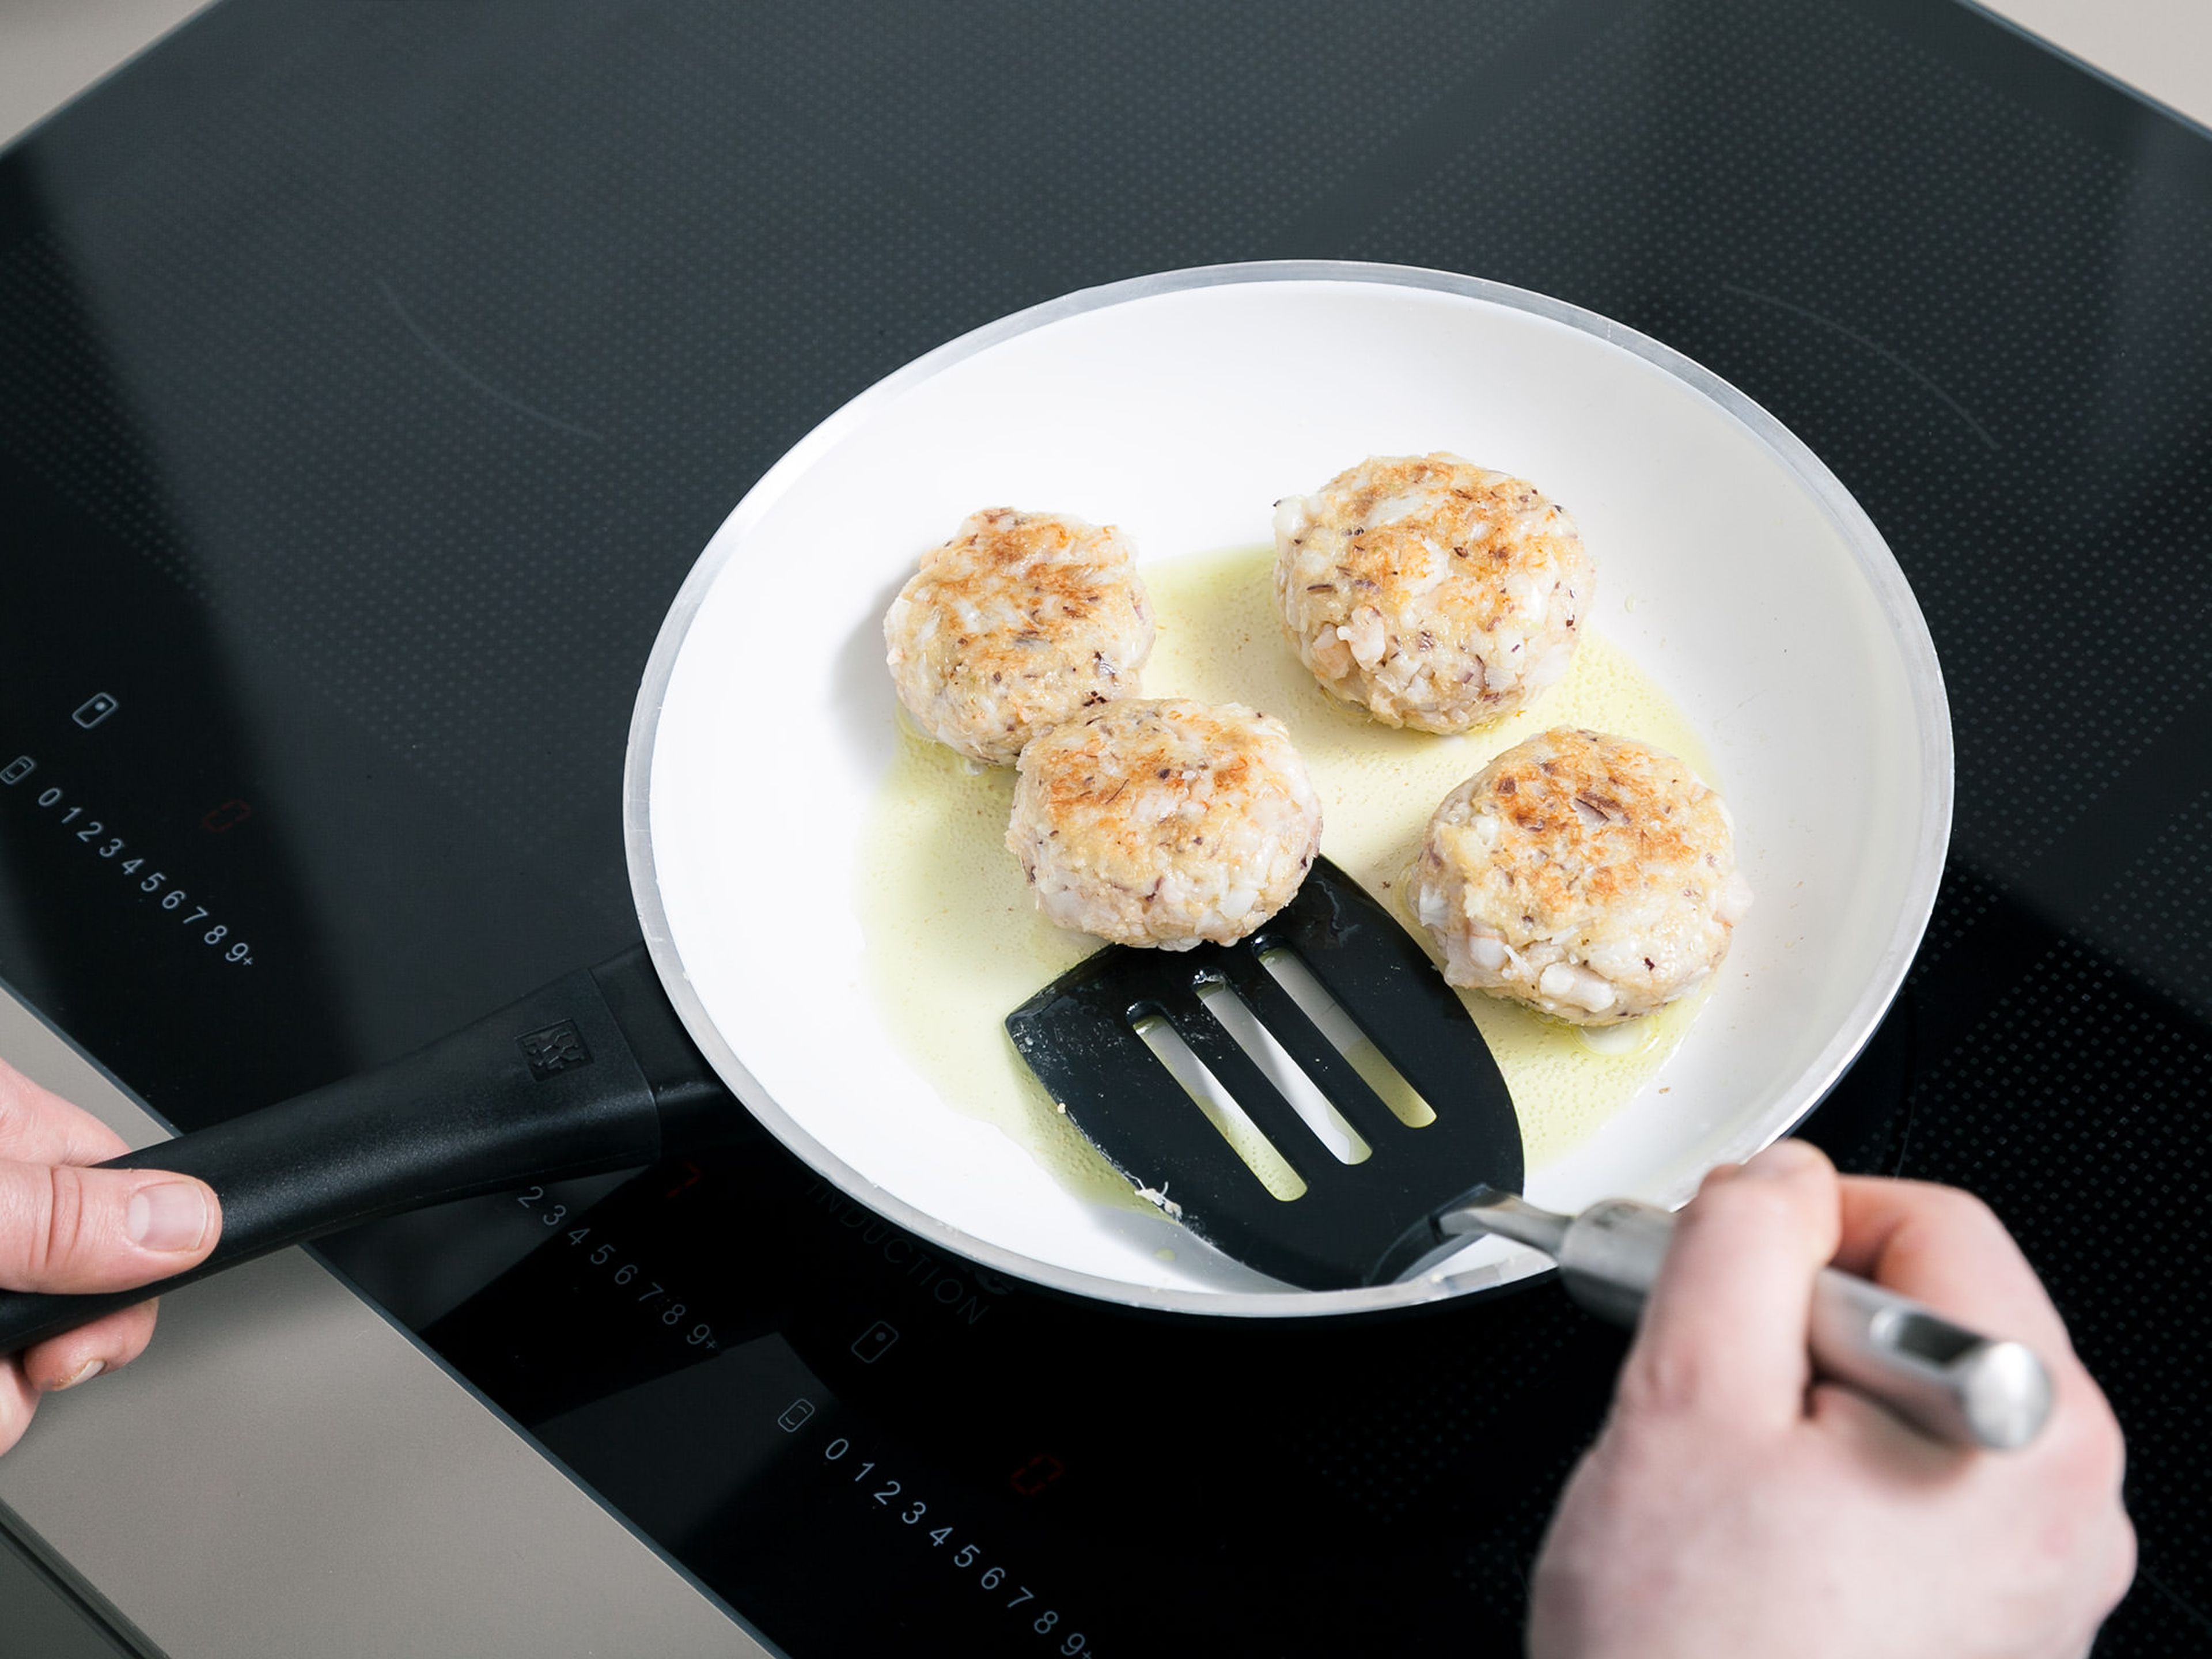 Fry fishcakes in batches for approx. 3 – 4 min. on either side or until golden brown, pressing down slightly to form a patty shape. Serve with salsa and garnish with basil. Enjoy!